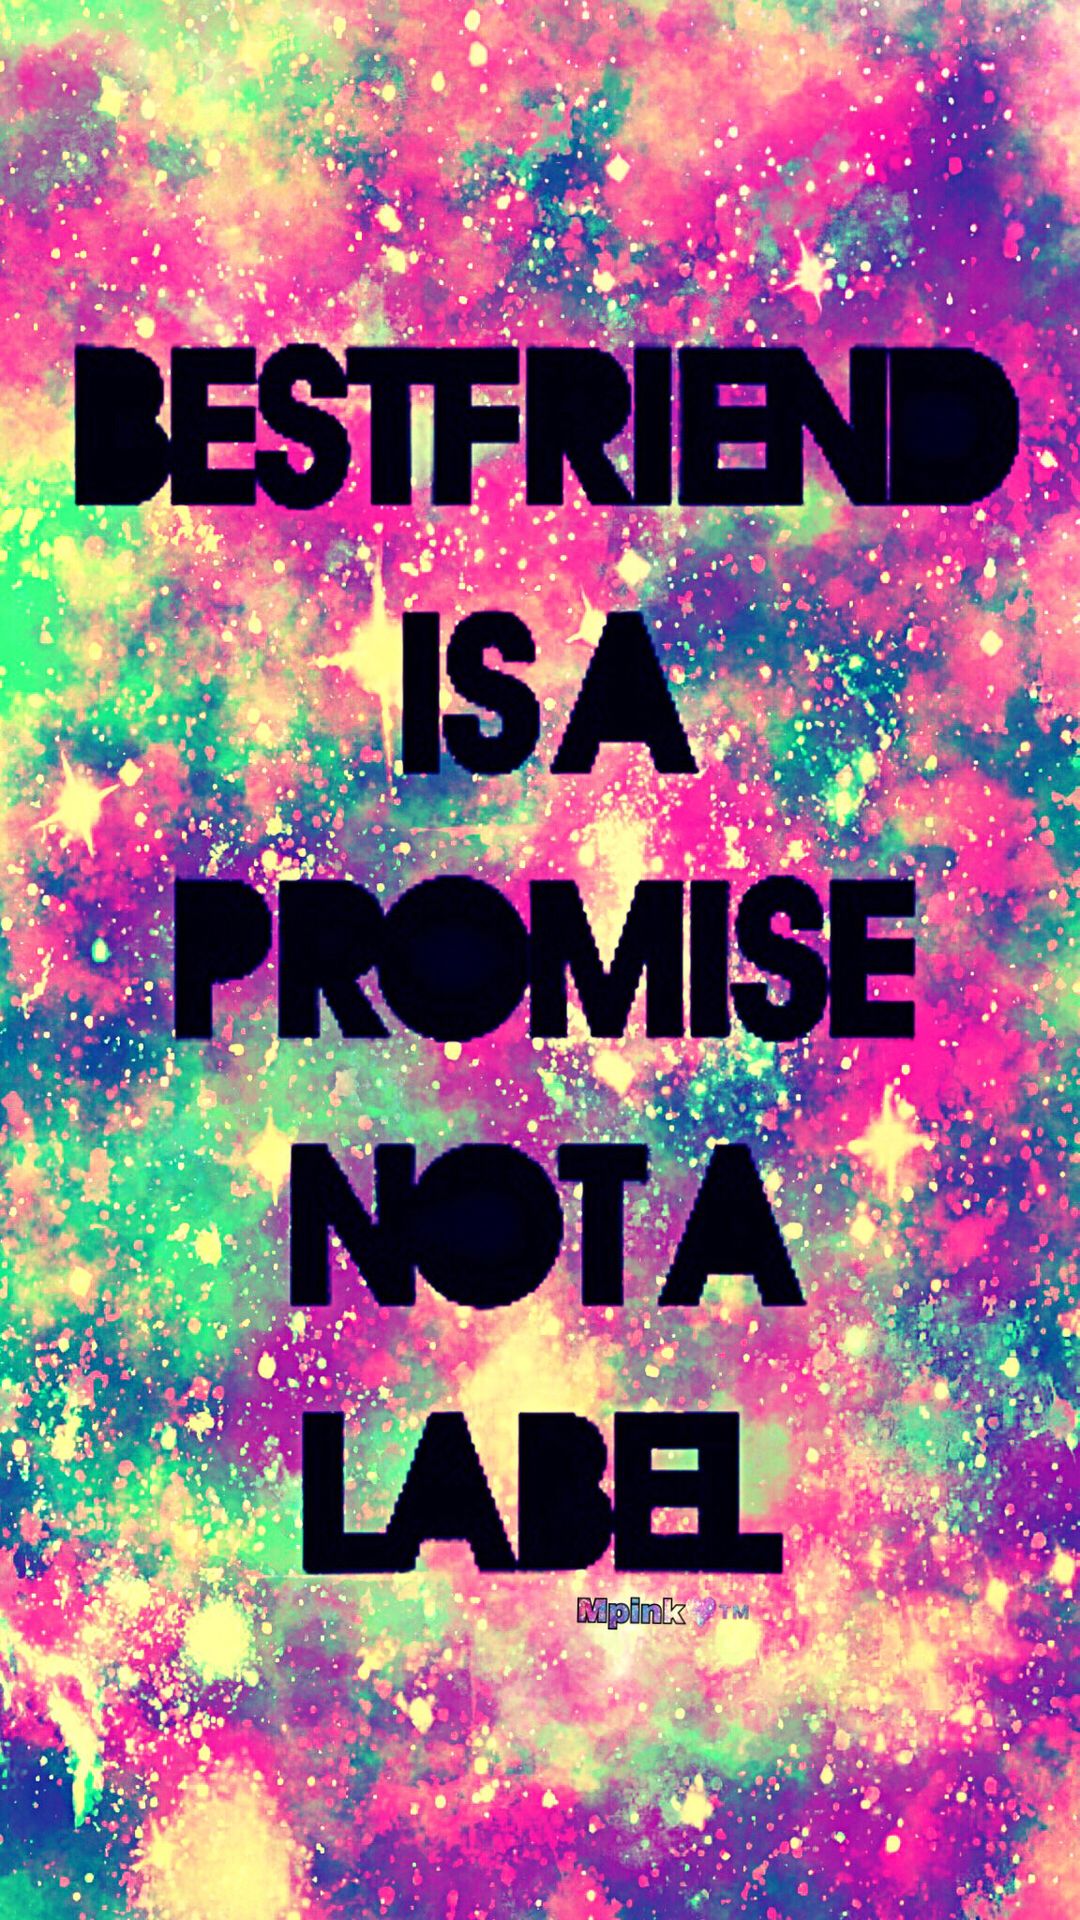 Best friend galaxy wallpaper androidwallpaper iphonewallpaper wallpaper galaxy sparkle glitter lockscreen preâ cute bff quotes friends quotes bff quotes